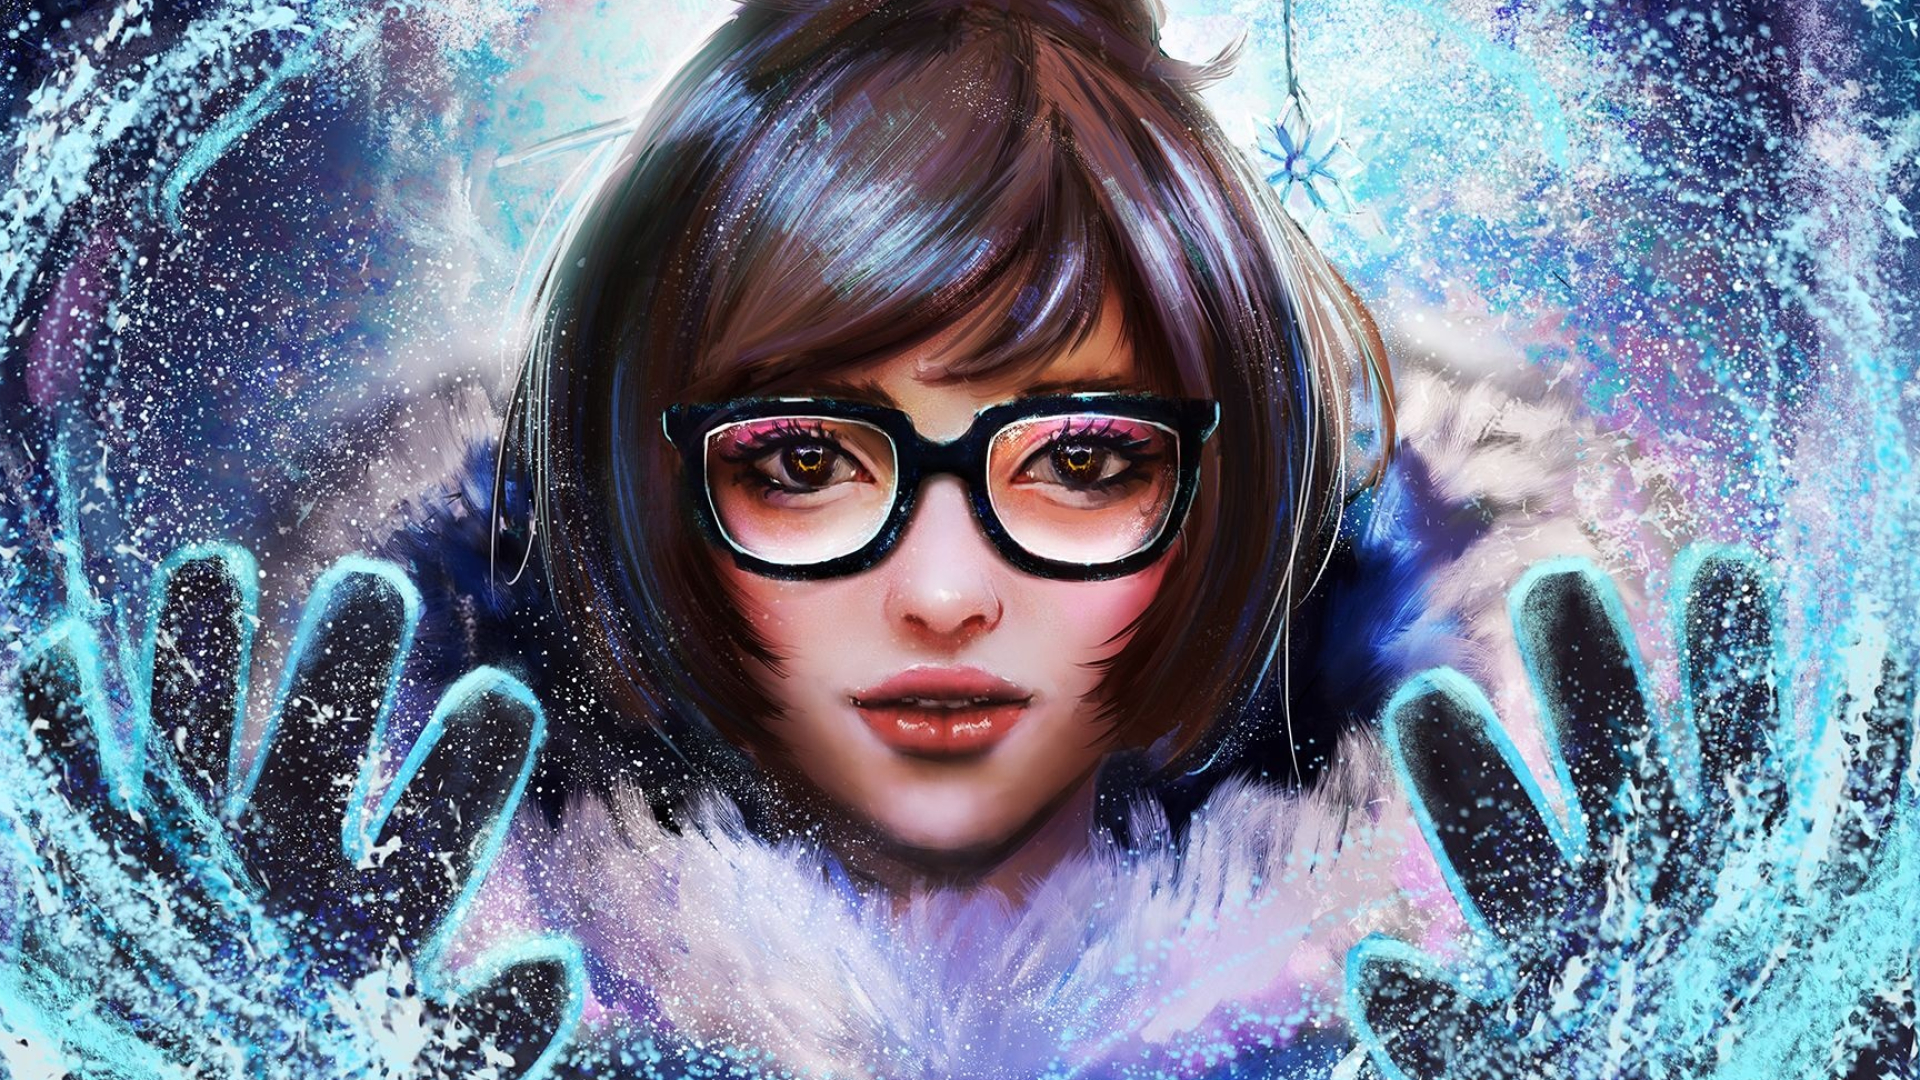 Mei (Overwatch), High-resolution gaming, Top-rated wallpapers, Fan-favorite character, 1920x1080 Full HD Desktop